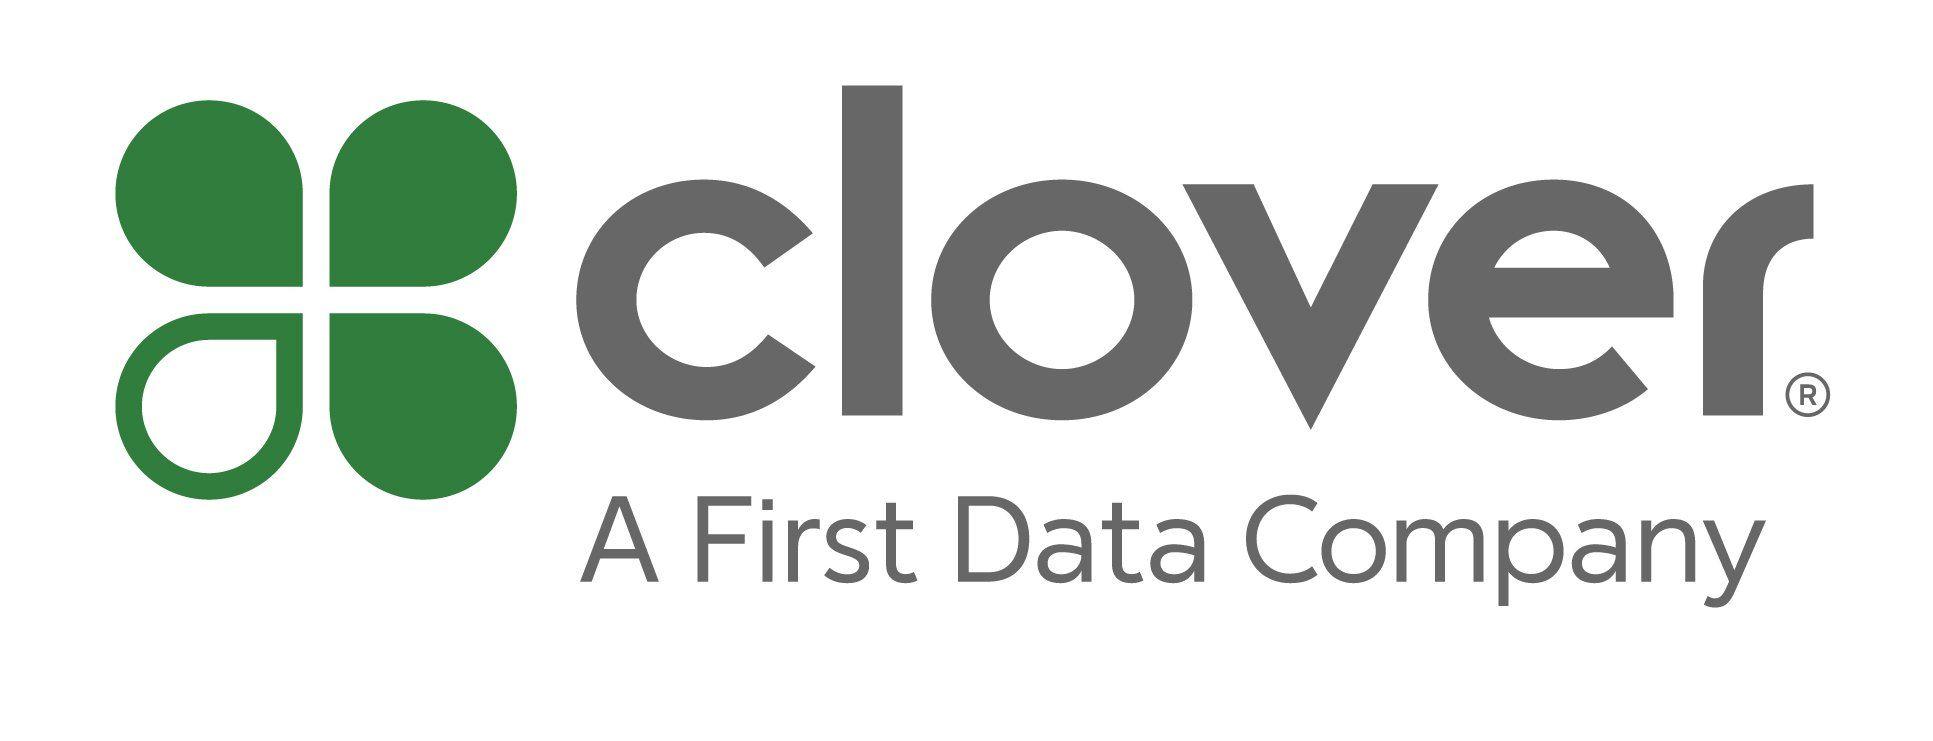 New First Data Logo - Clover Station Point of Sale Review